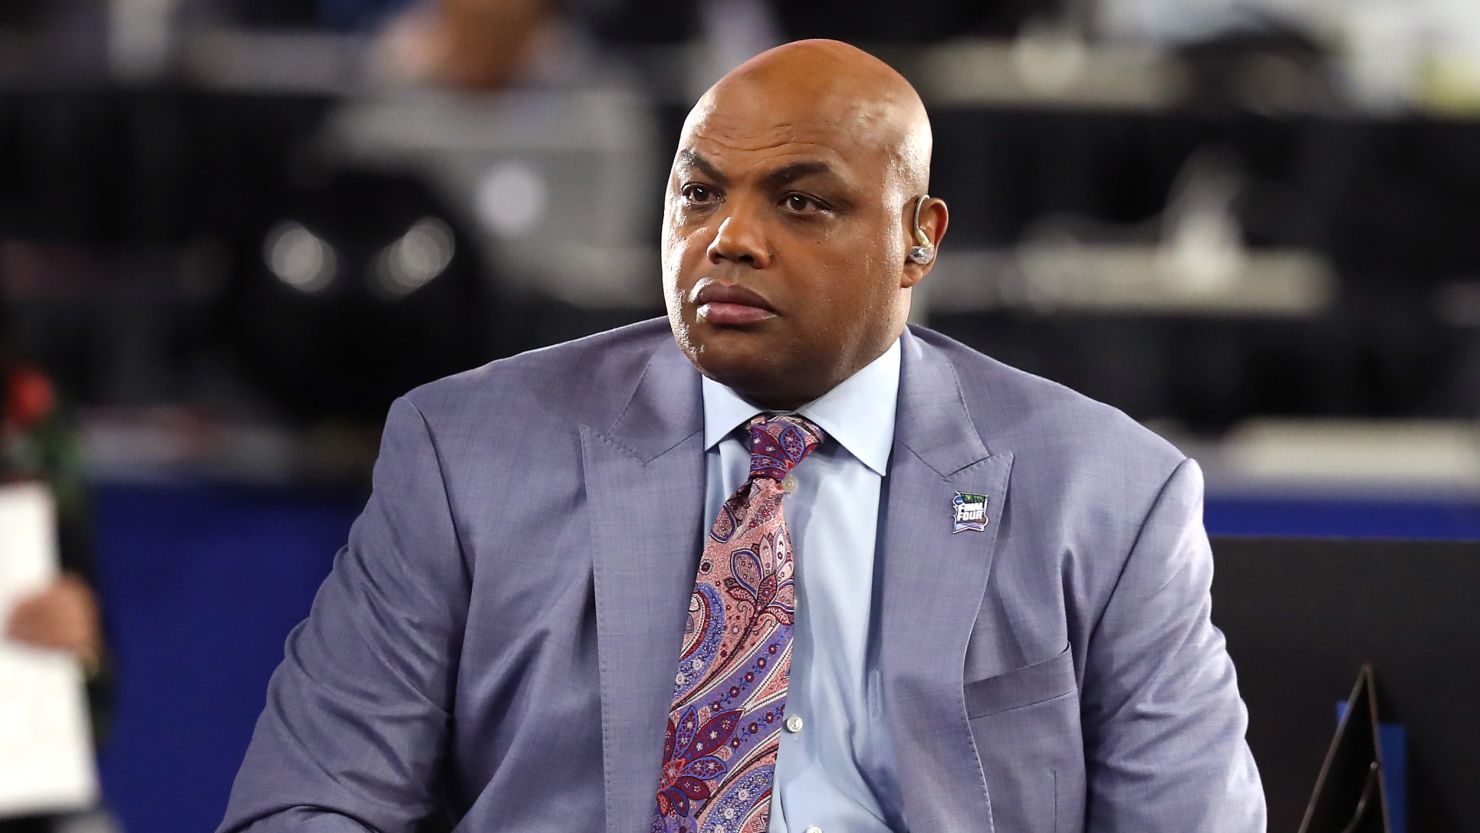 Charles Barkley is hesitant to compare Breonna Taylor's death to other cases.